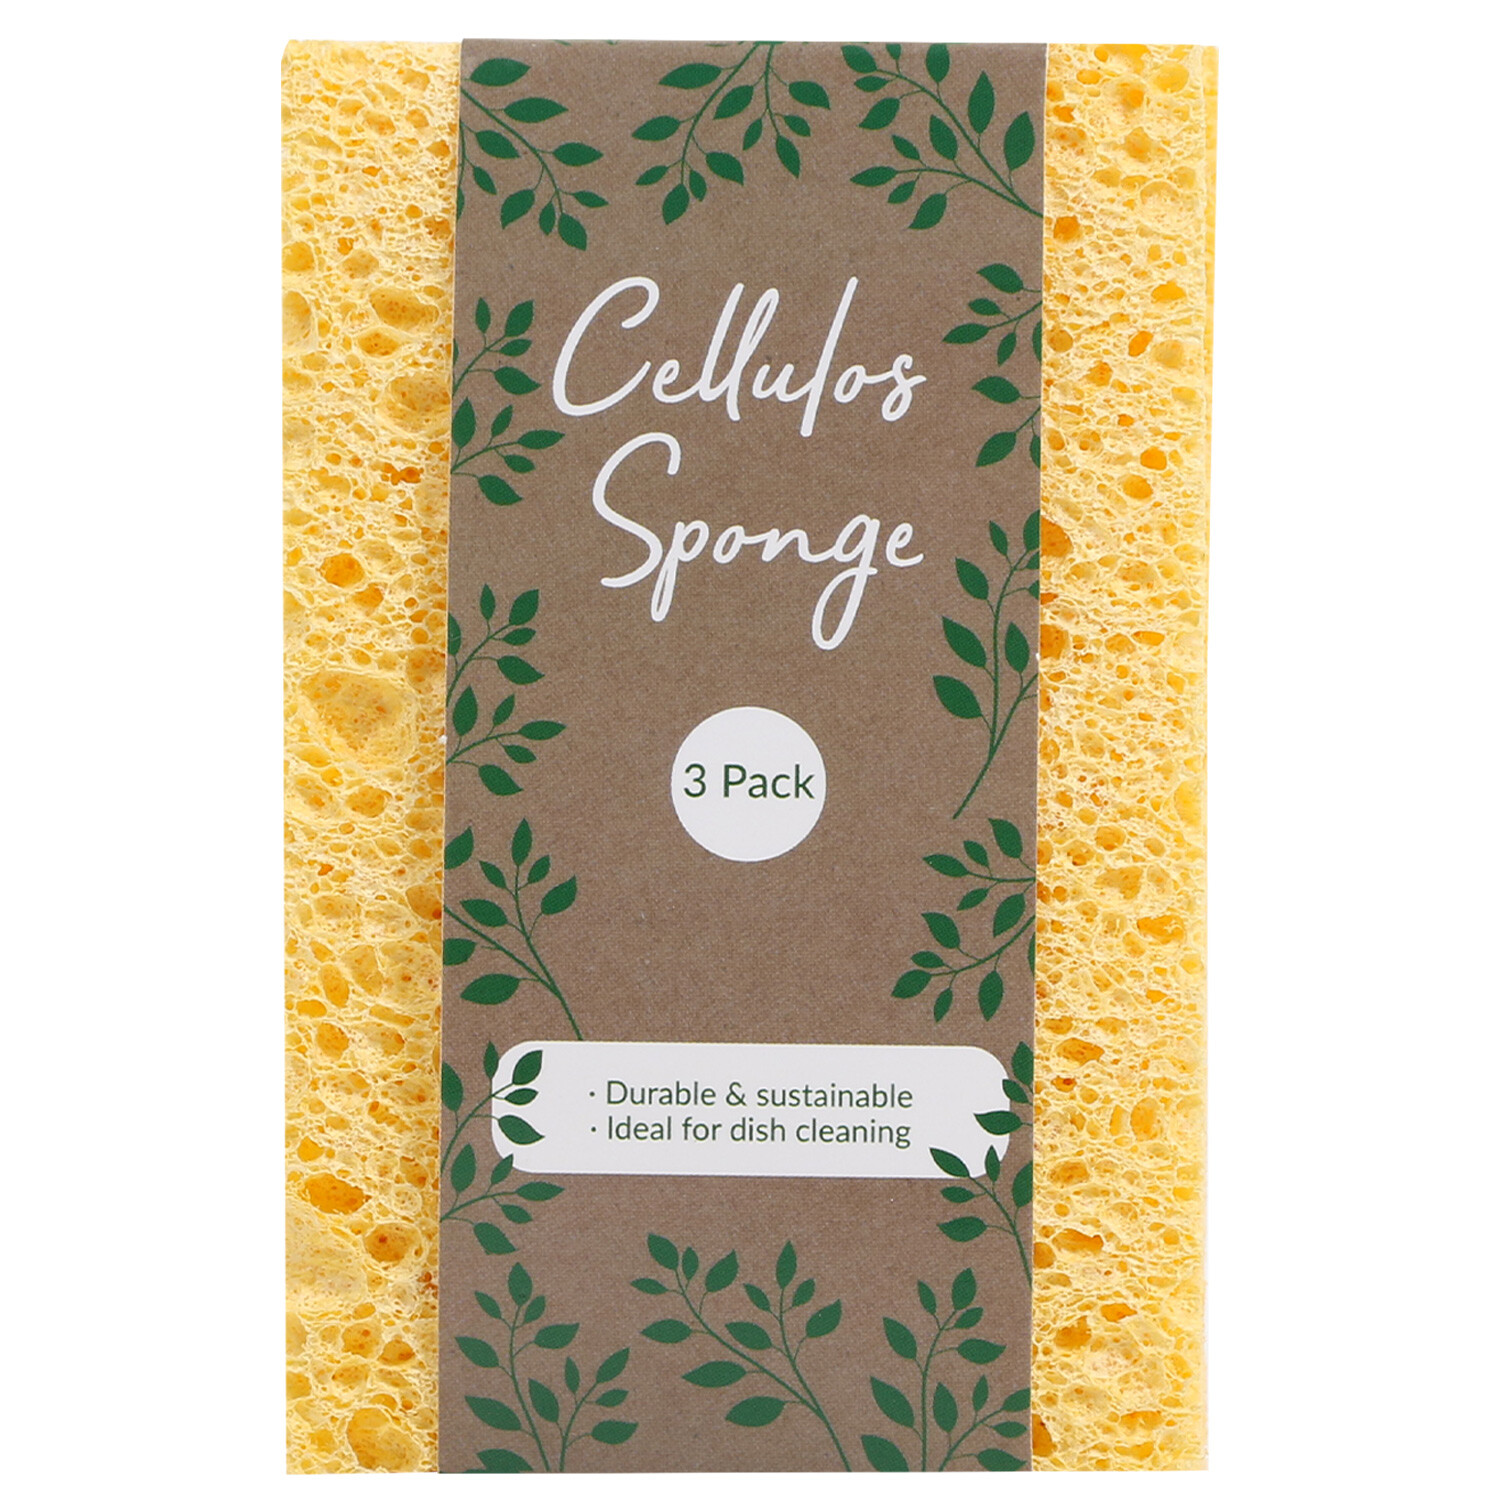 Pack of 3 Cellulose Sponges - Yellow Image 1